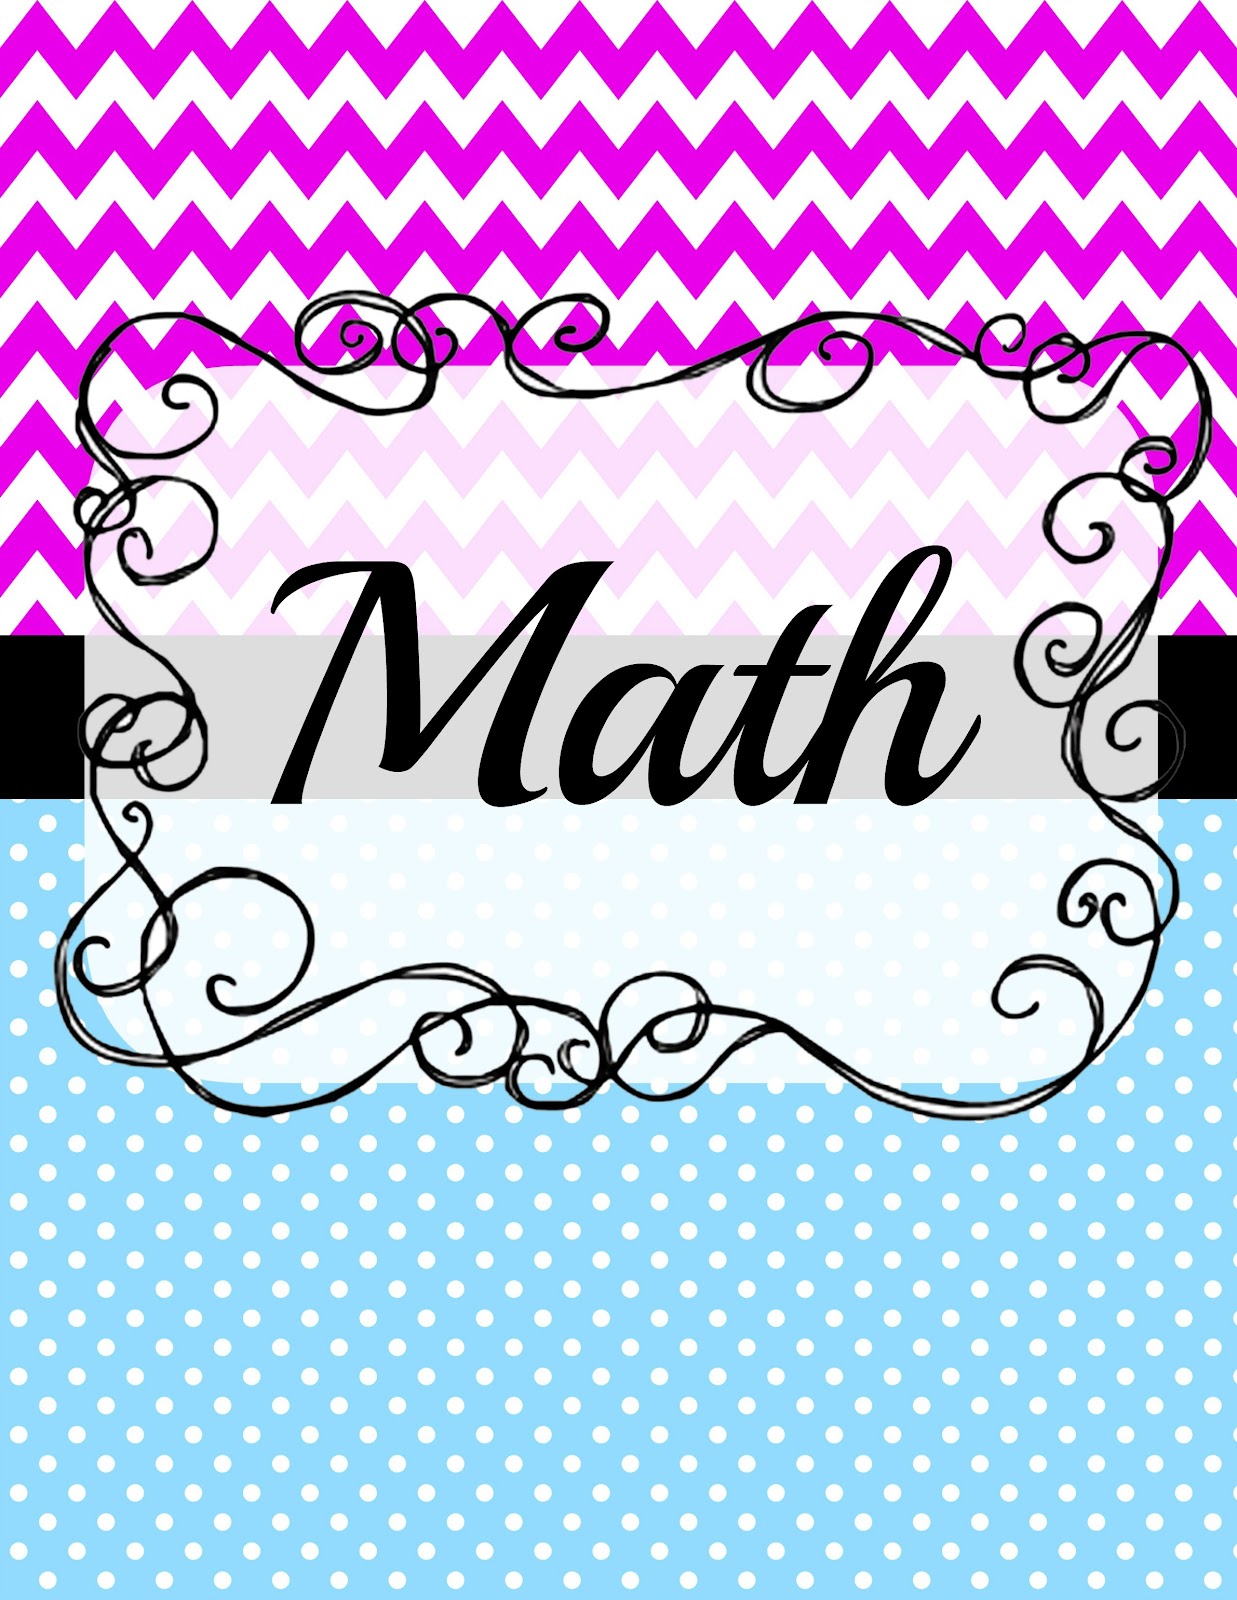 5 Best Images of Free Printable Math Notebook Cover Cute Math Binder